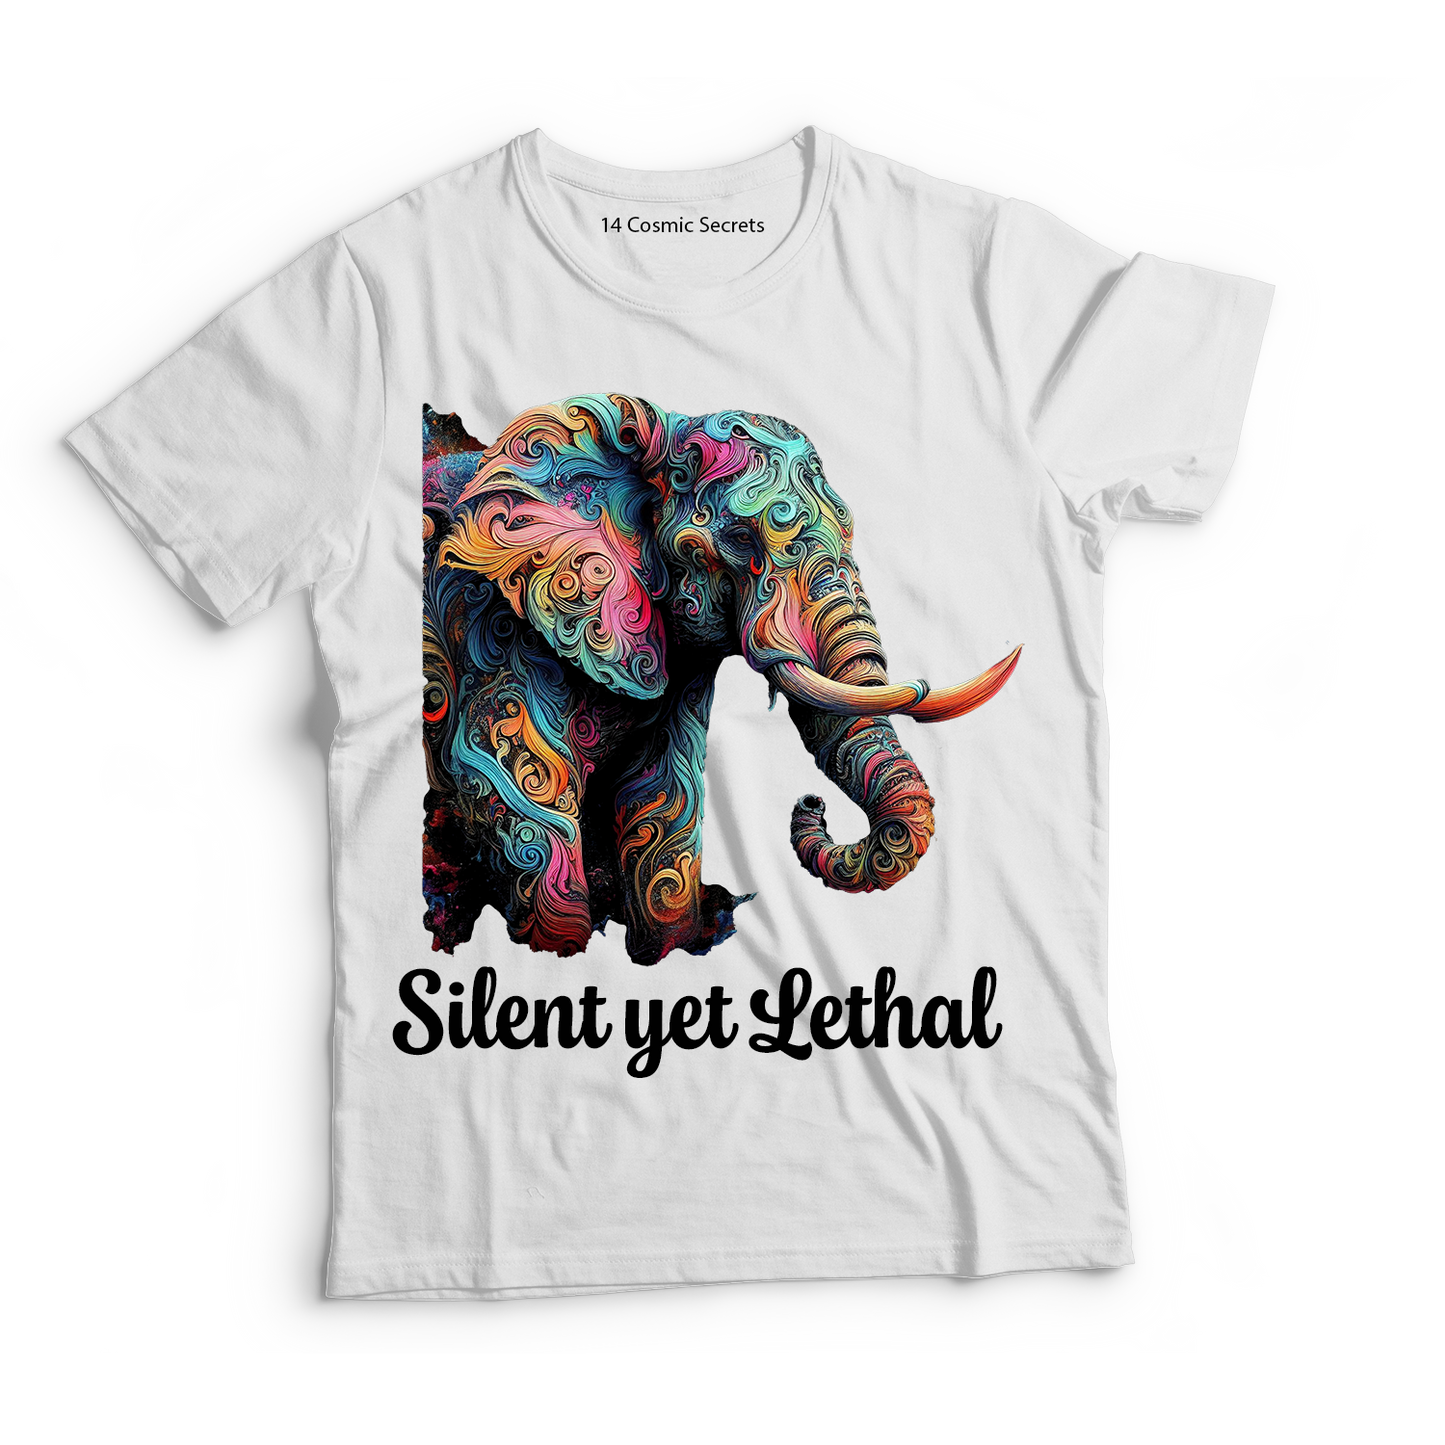 Incredible Indian Elephant Shirt  Graphic Printed T-Shirt  Cotton T-Shirt Magnificence of India T-Shirt